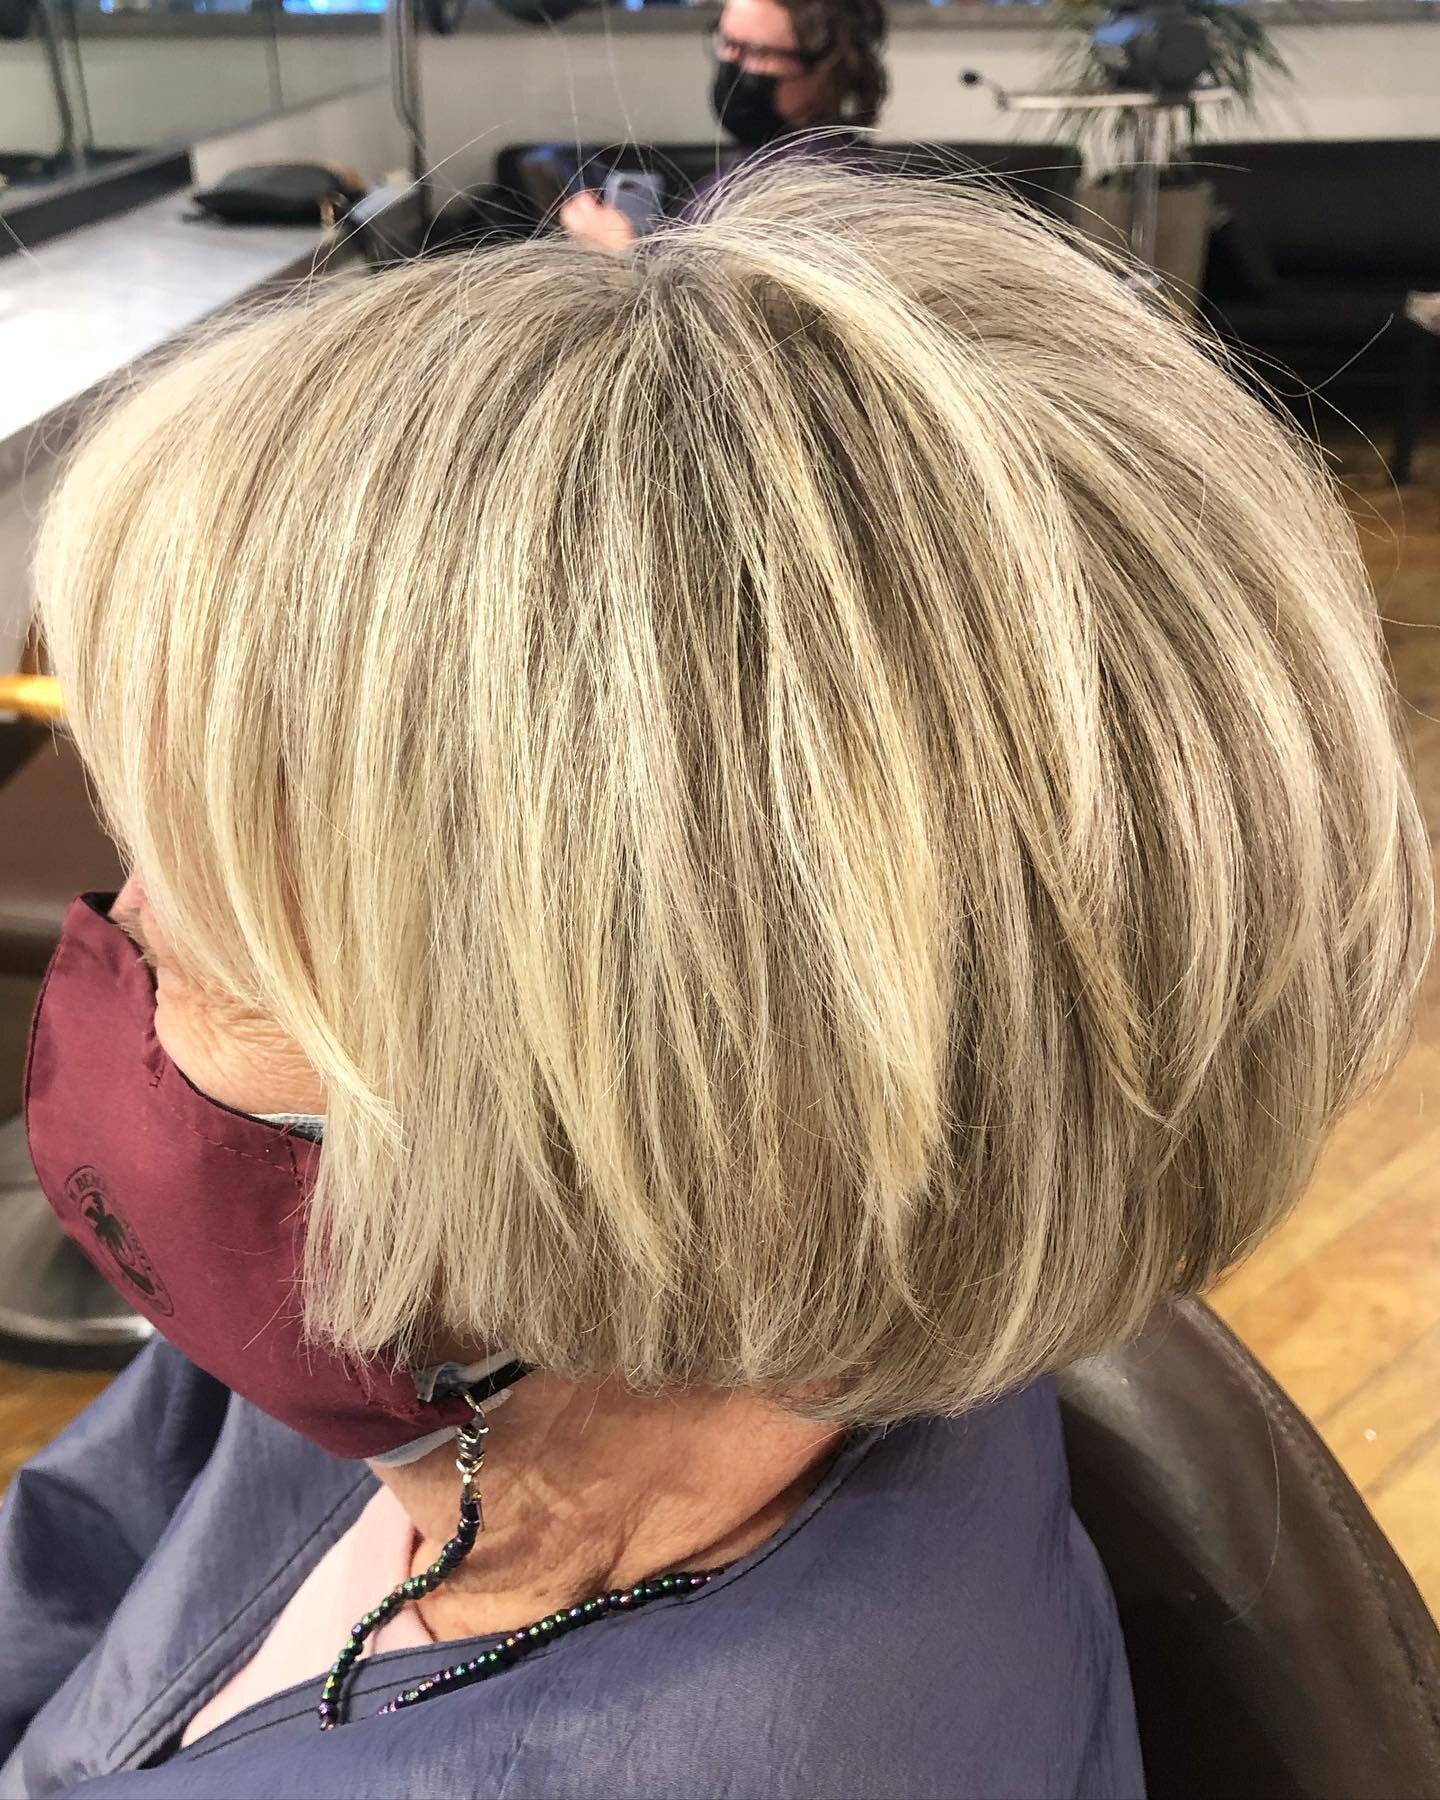 Our blondes are never basic ✨ 

STYLIST: Cut &amp; Color by Lois 
.
.
.
#blonde #highlights #depth #blowout #haircut #hairstyles #colorist #dimensionalblonde #beauty #salon #natick #boston #shorthair